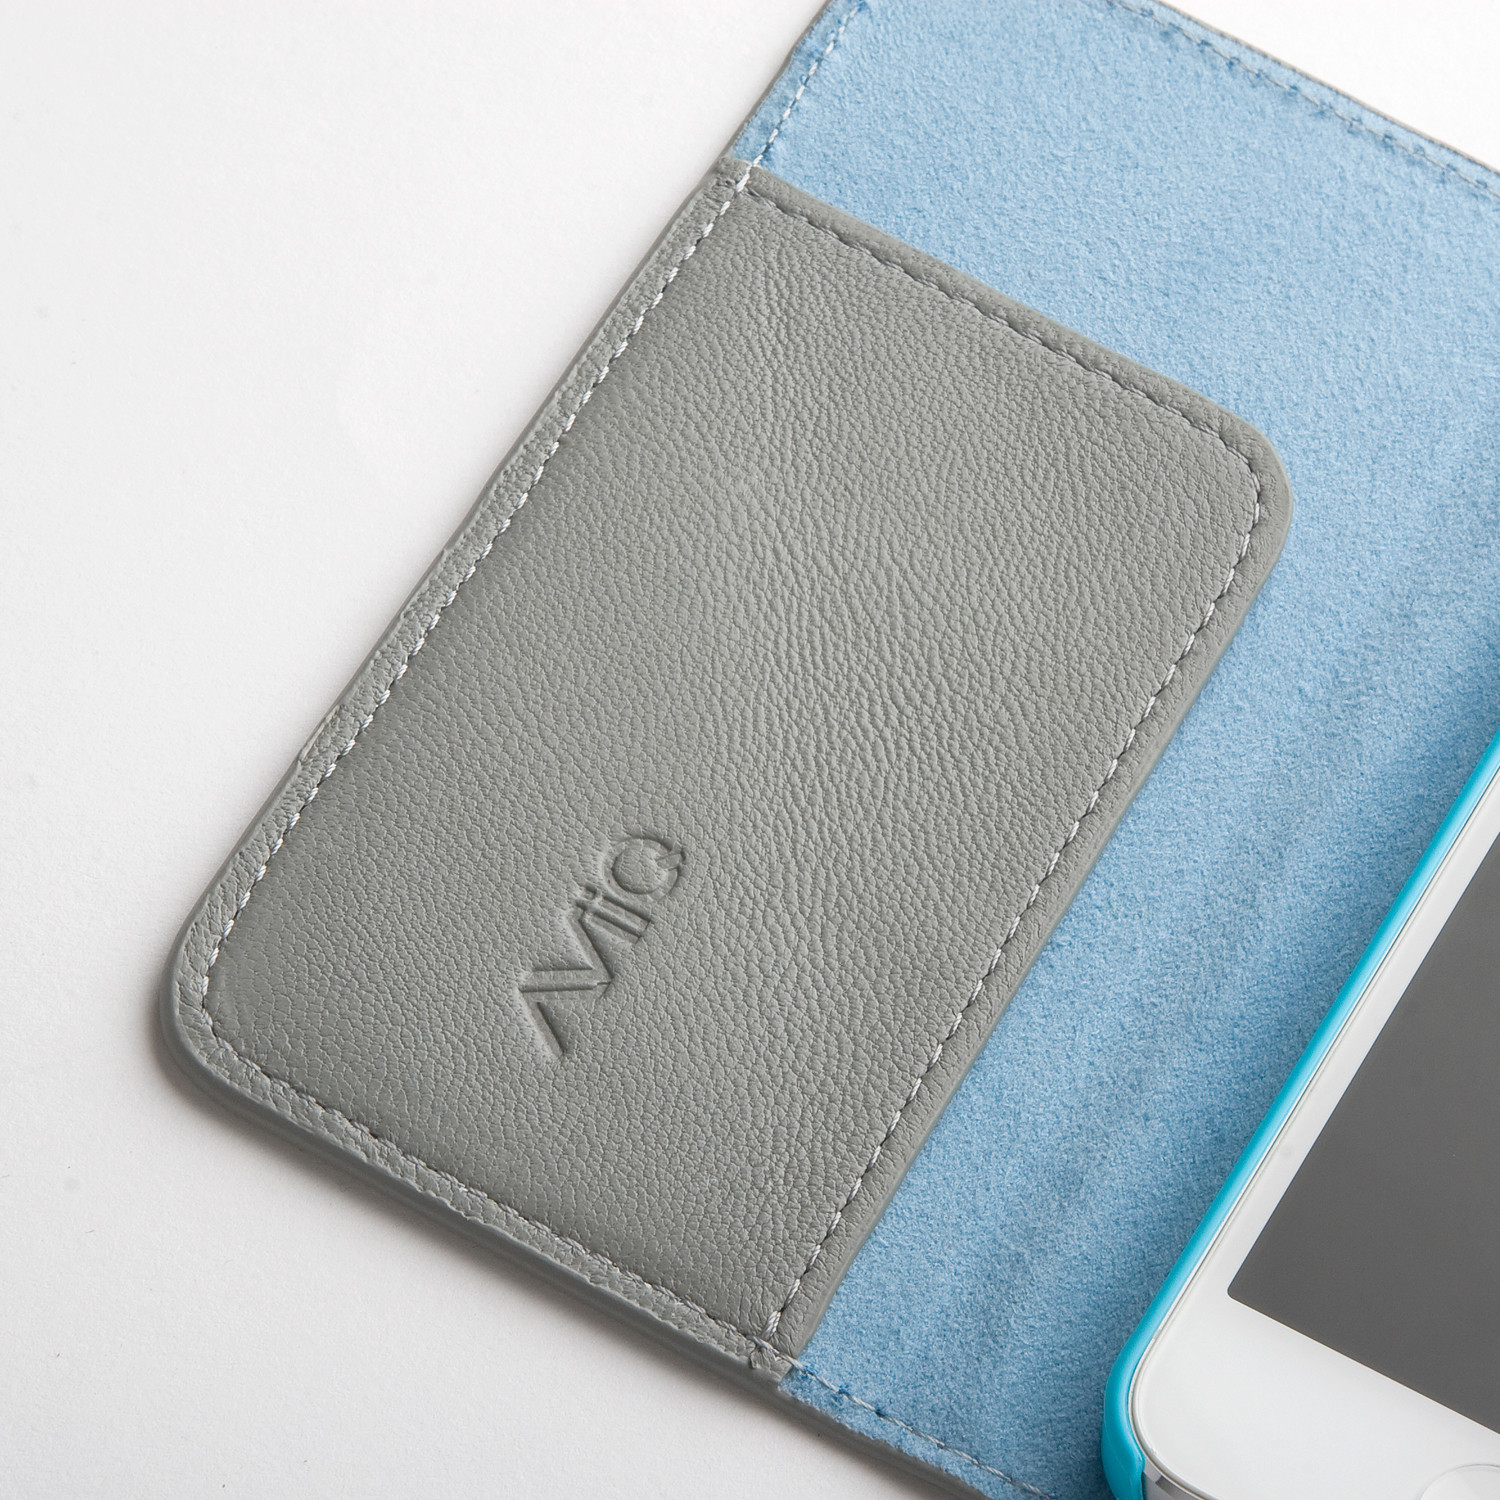 Thin Leather Wallet Case for iPhone 5 // Grey + Blue (Grey, Blue ...